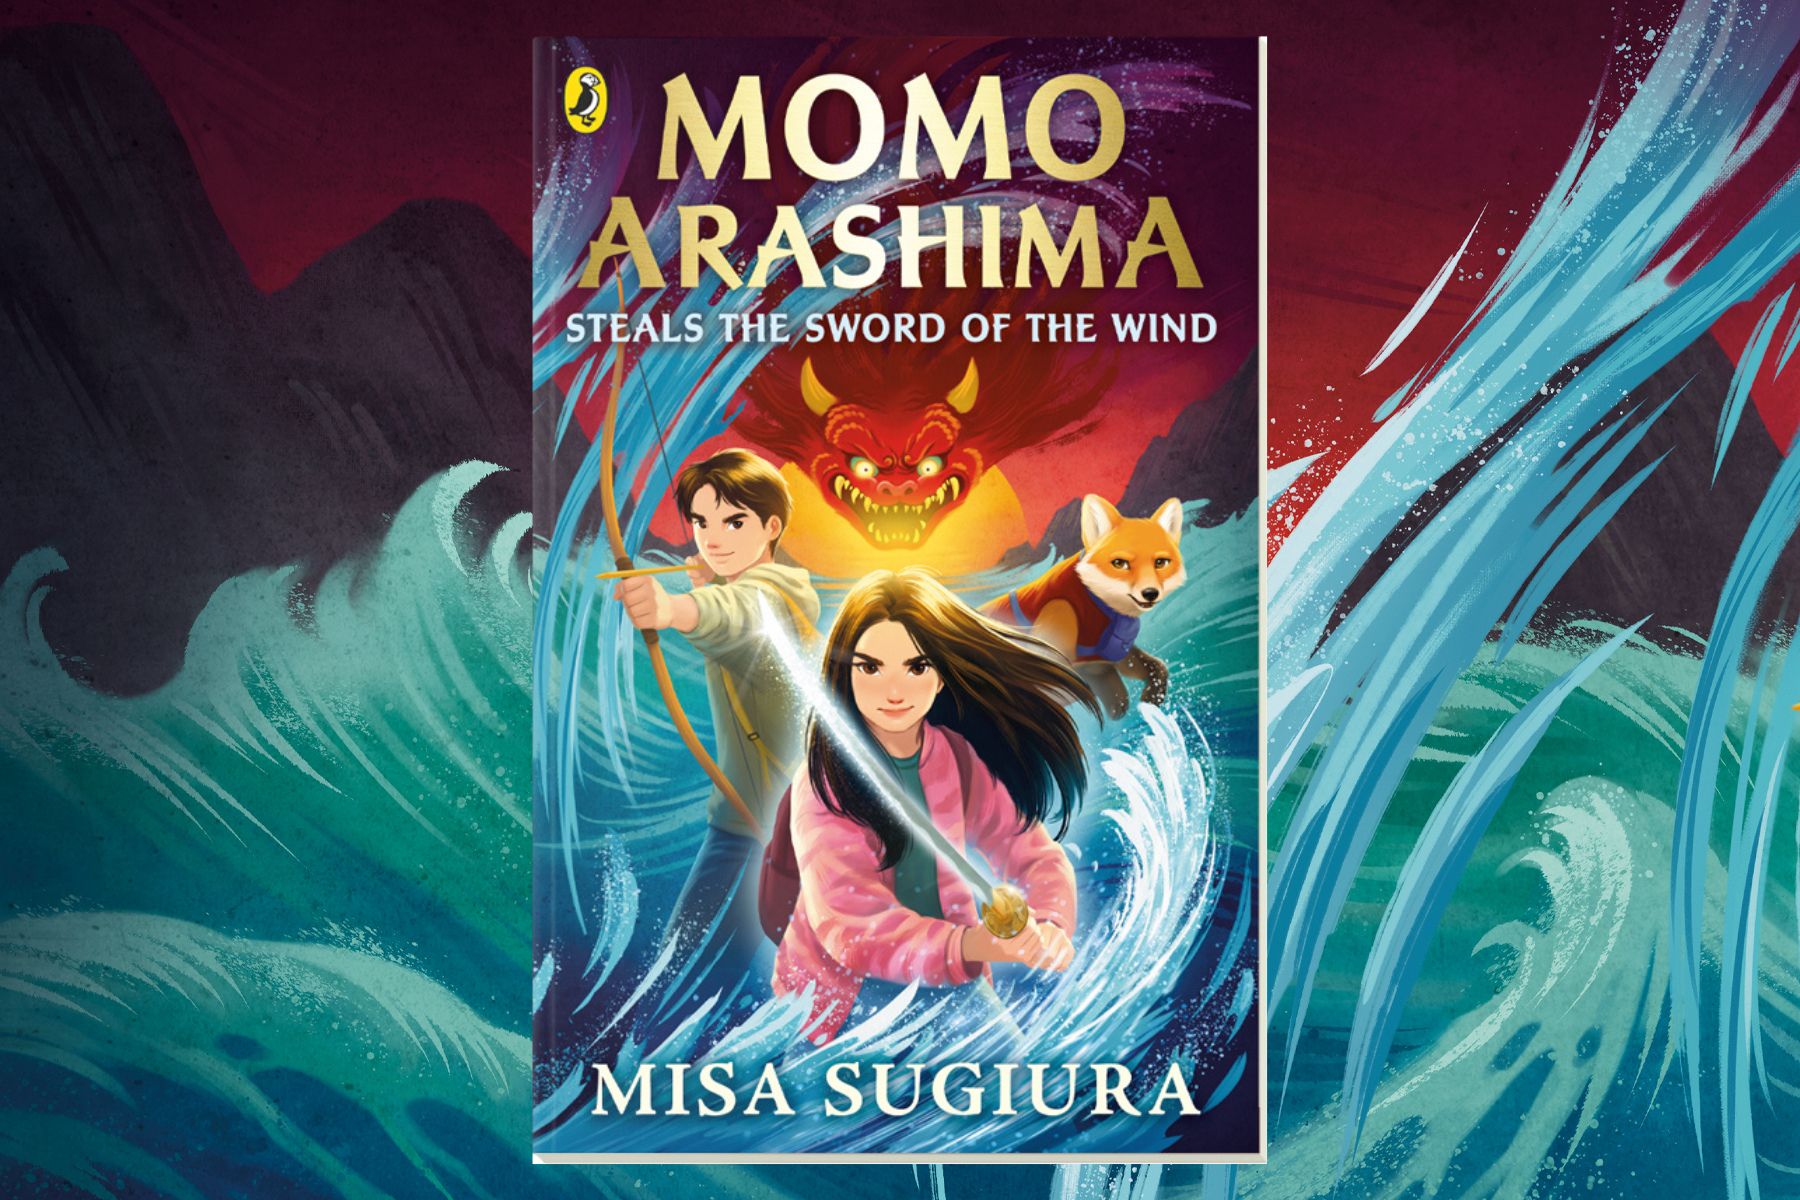 An image of the book cover of Momo Arashima on an illustrated background of water and mountains